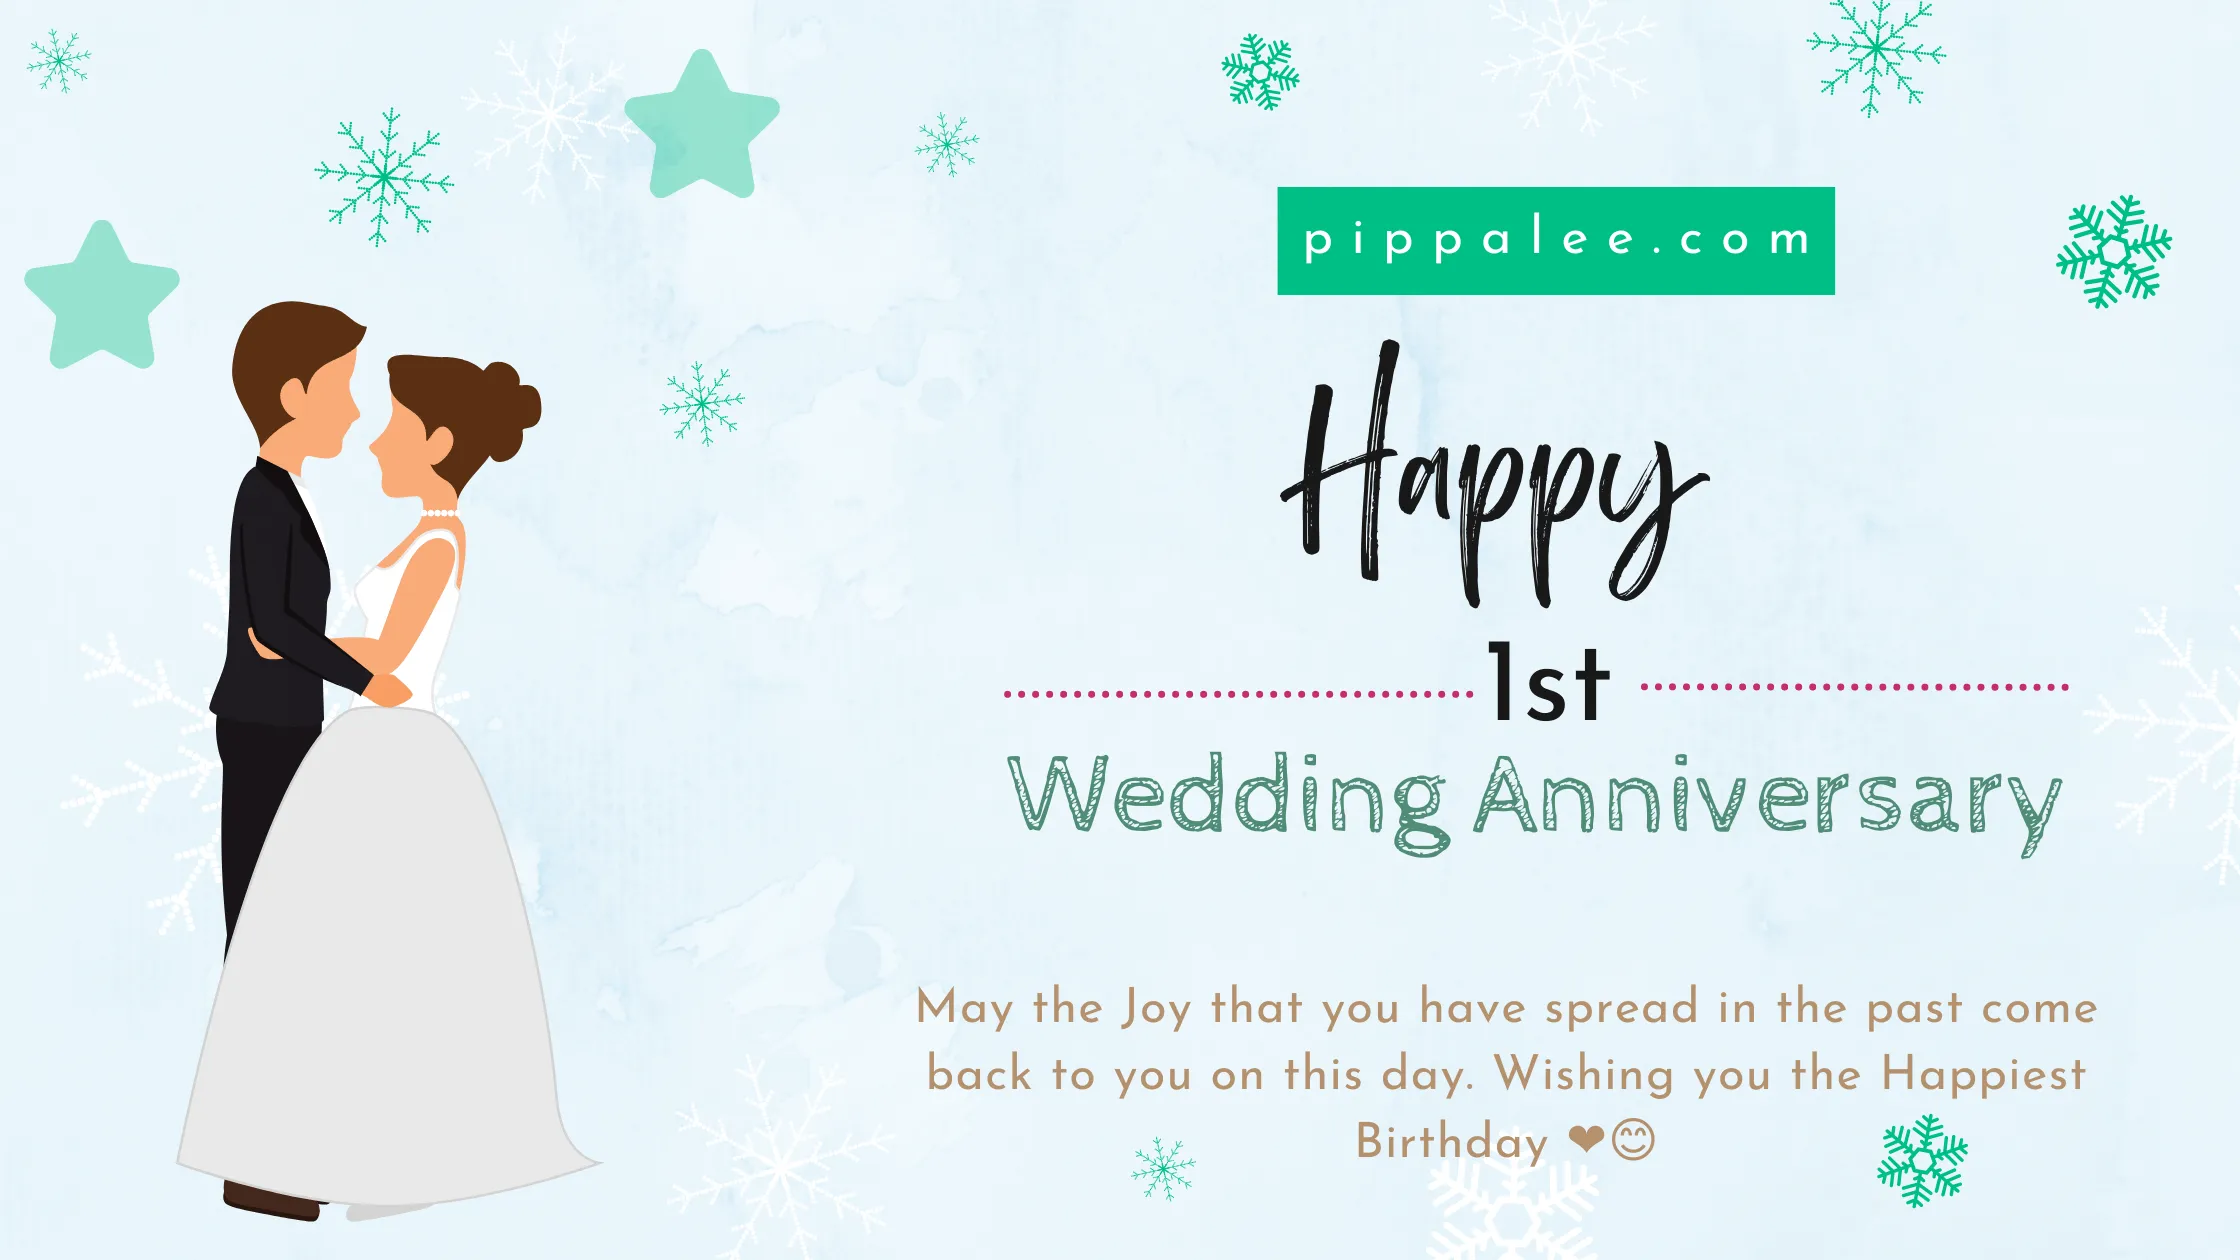 1st Wedding Anniversary - Wishes & Messages